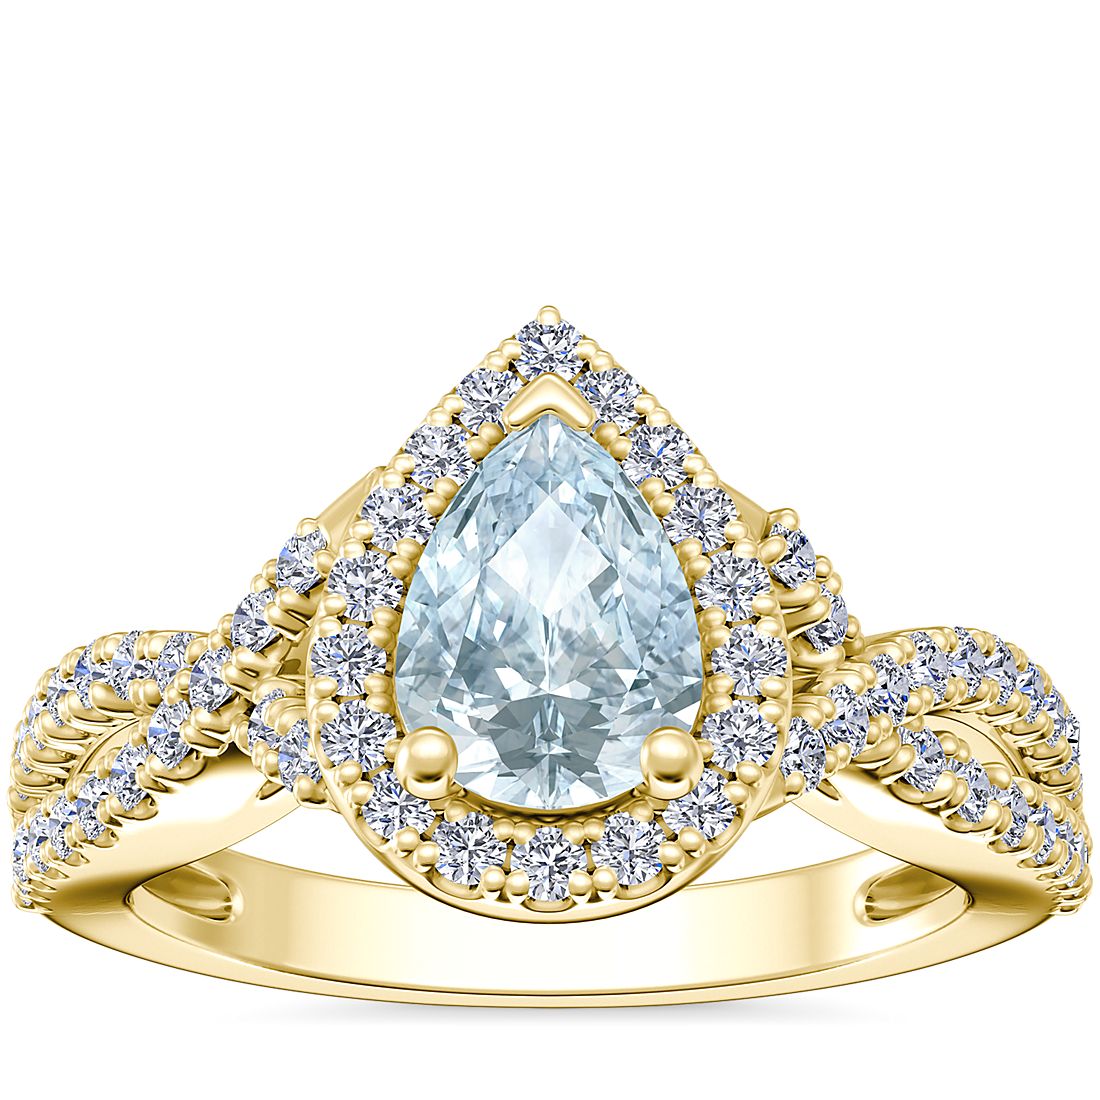 Twist Halo Diamond Engagement Ring with Pear-Shaped Aquamarine in 14k Yellow Gold (7x5mm)